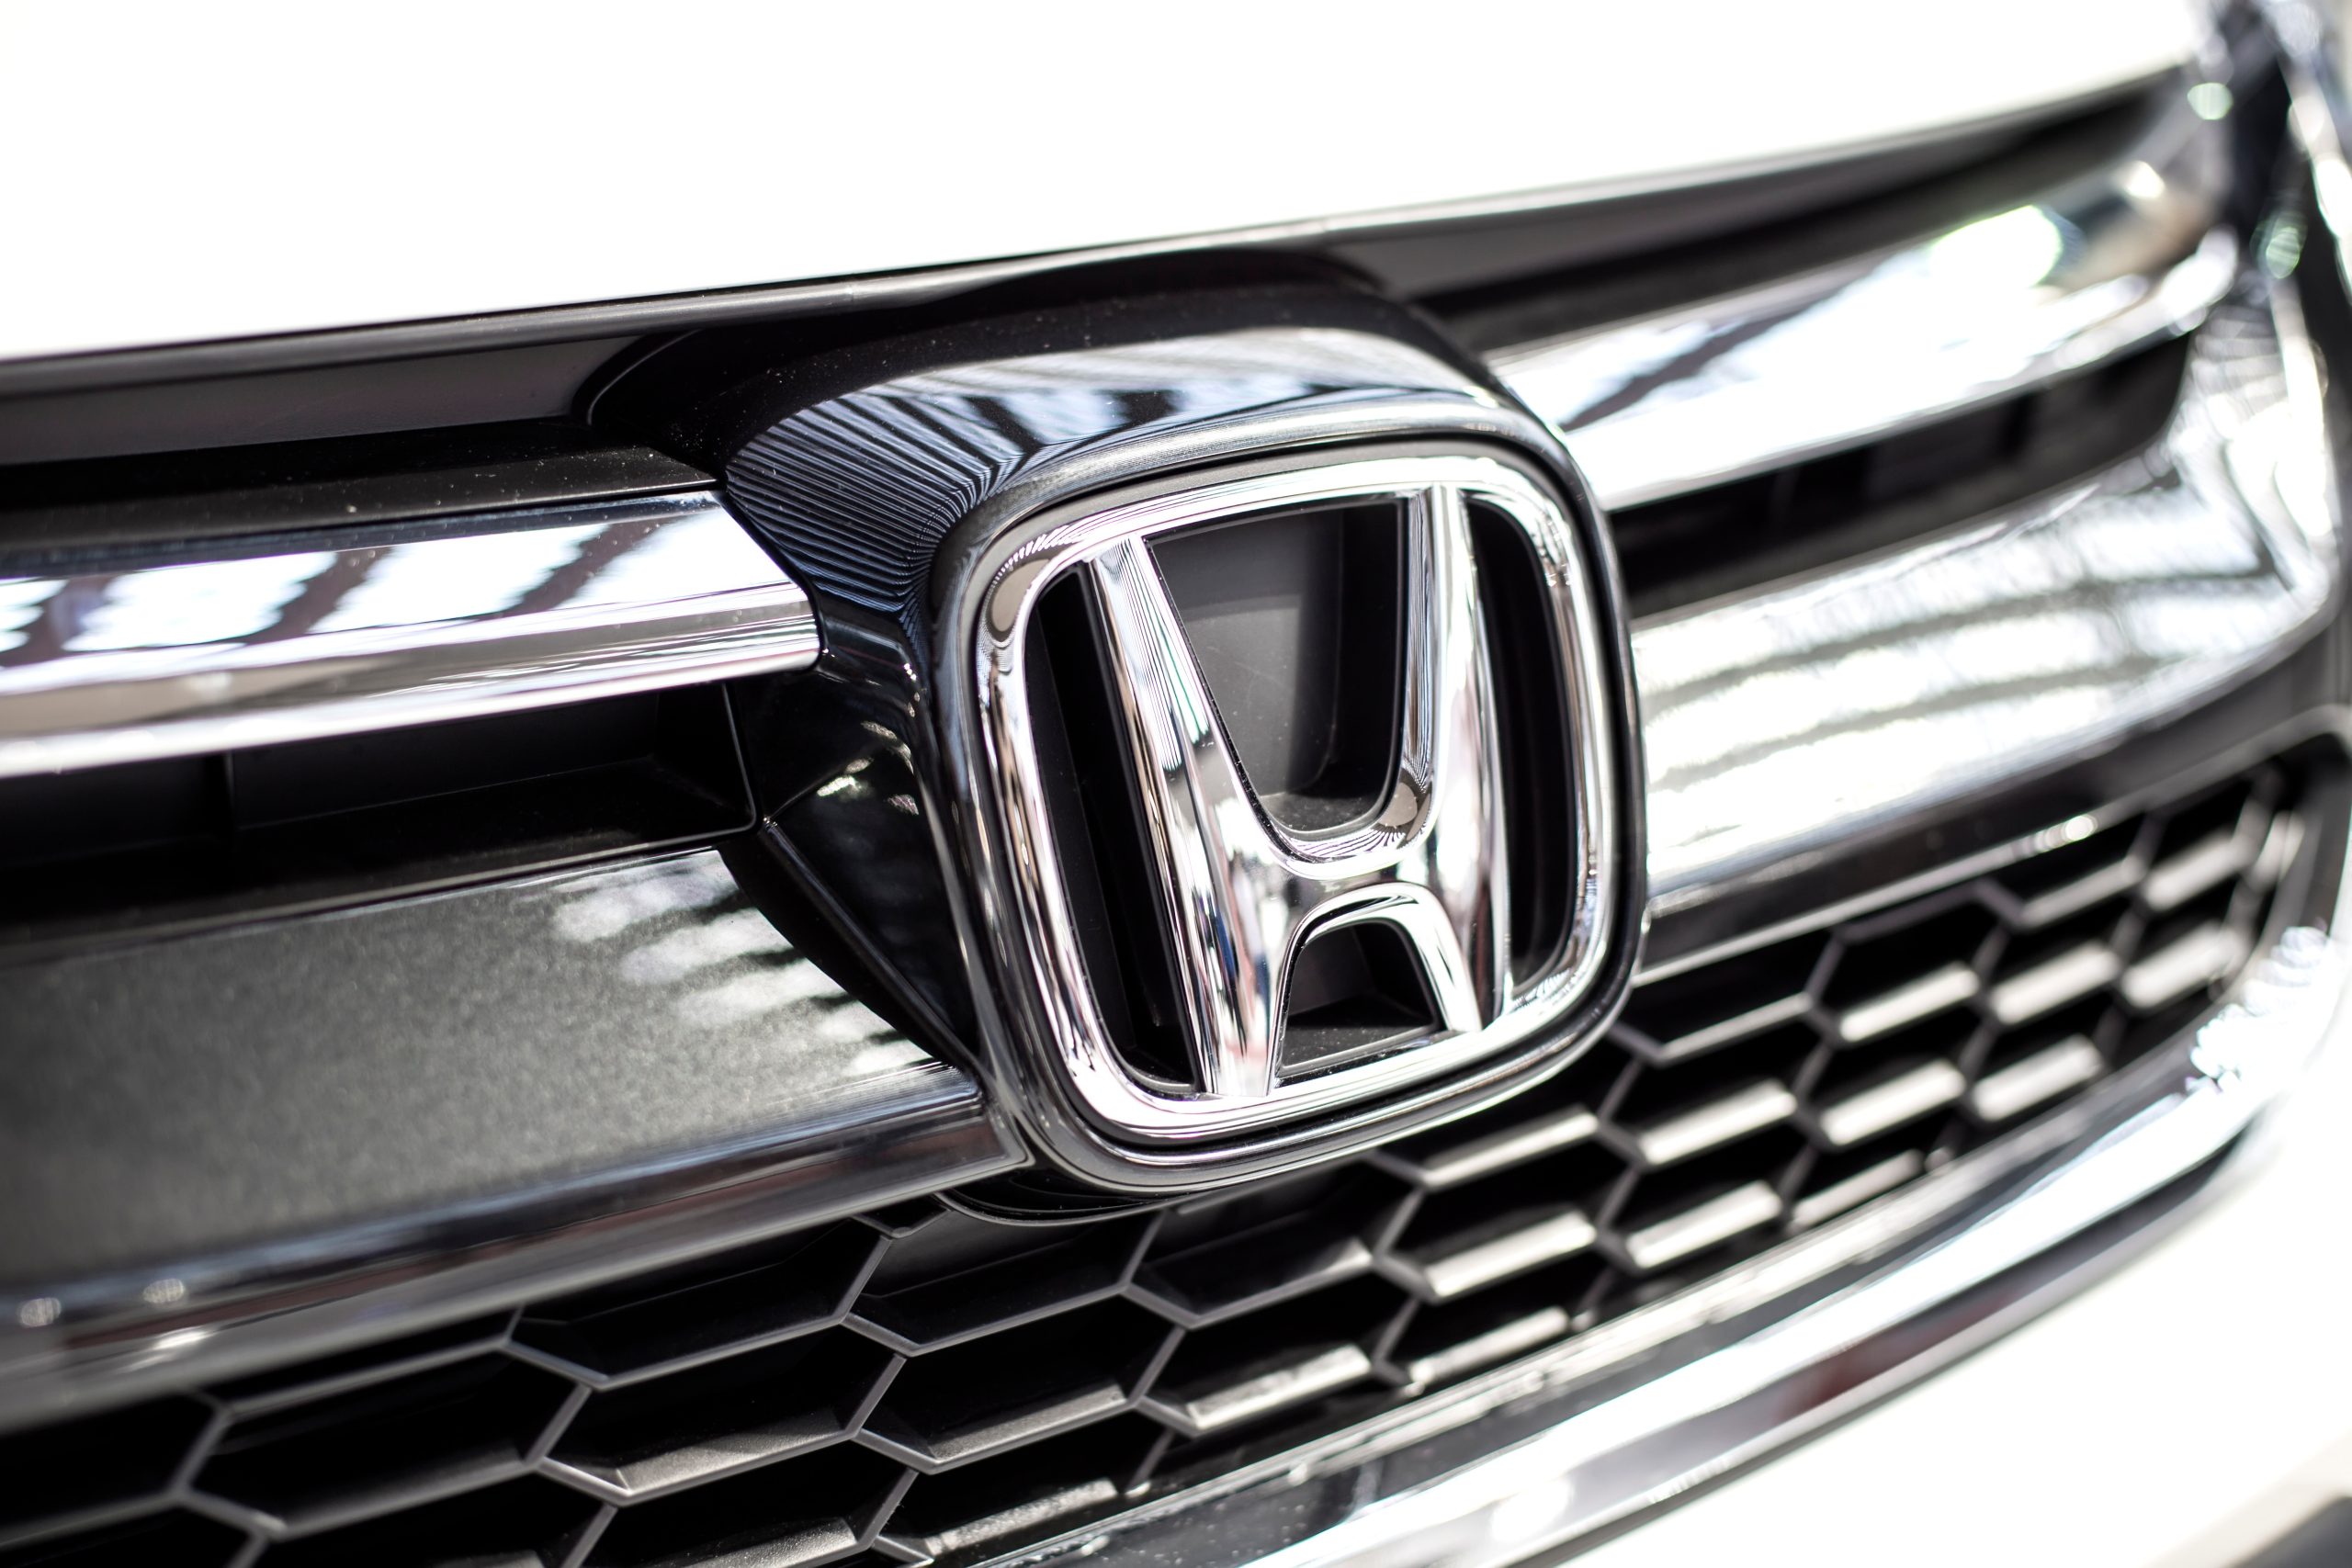 Honda faces a class action because of rodent damage.